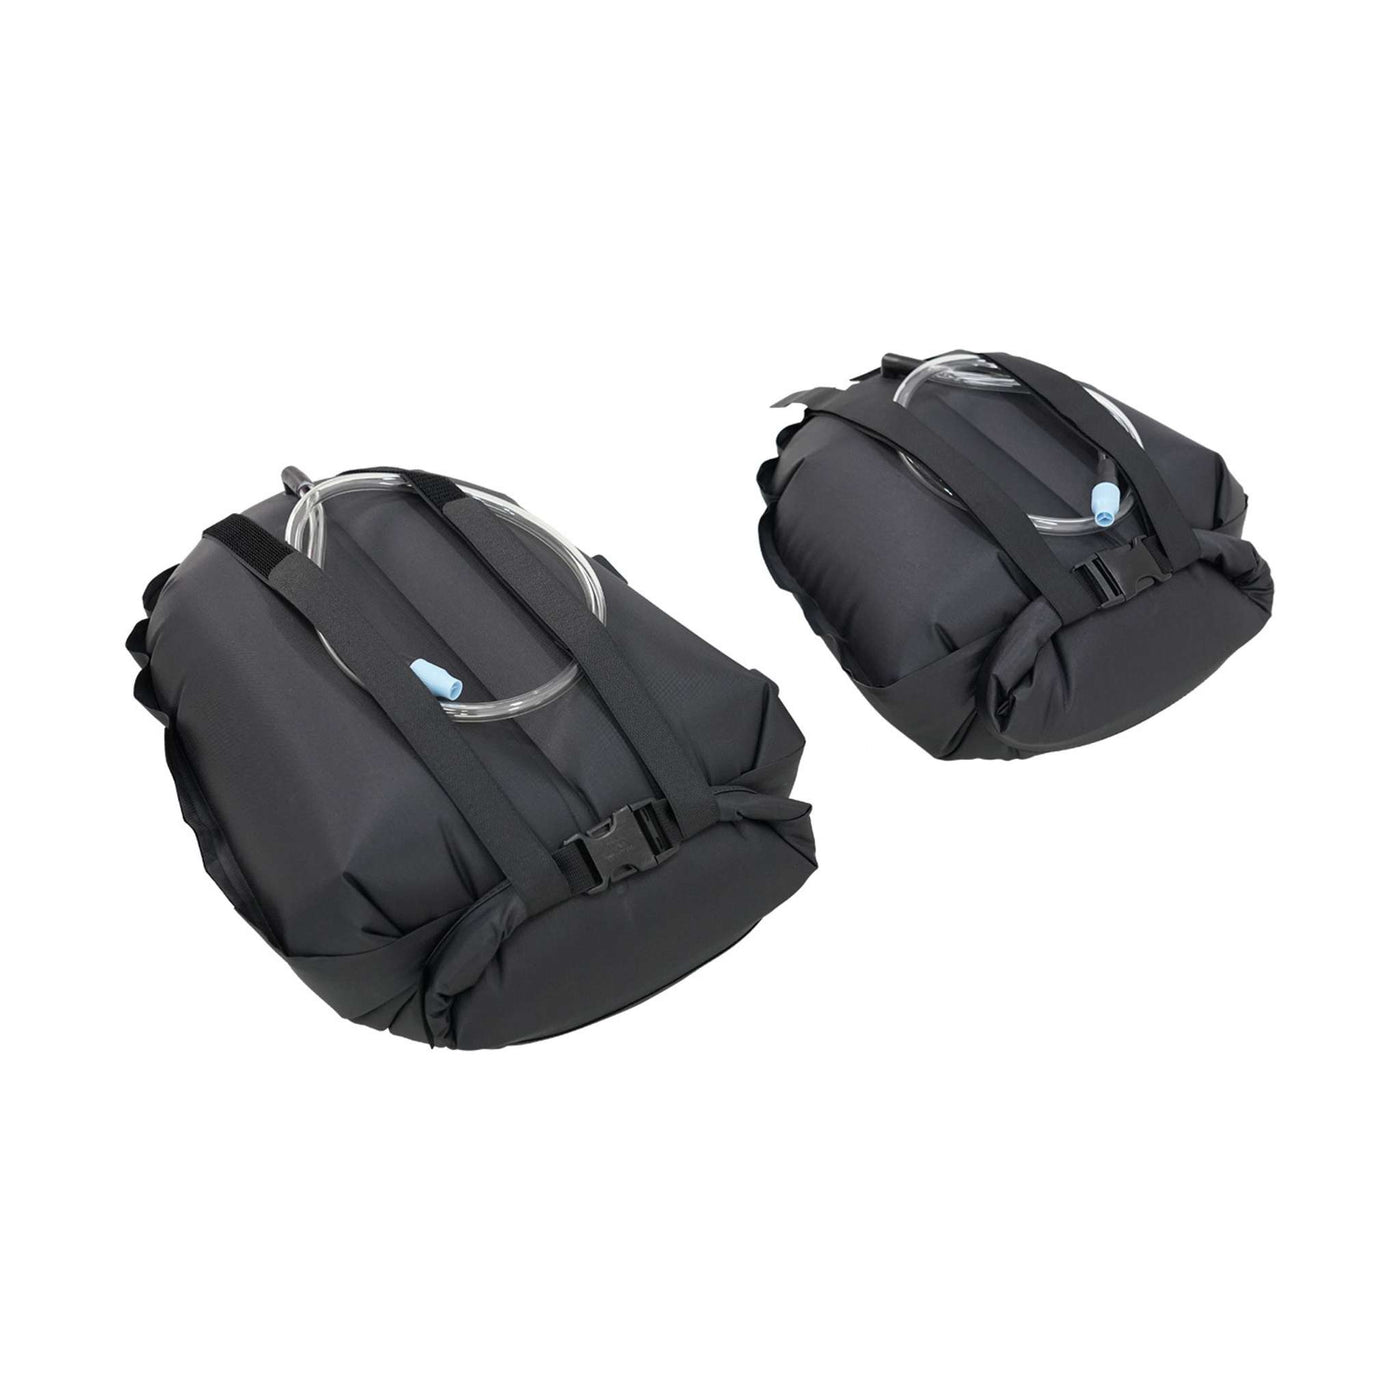 Micro Rafting Systems Adjustable Footrest | Packrafts Accessories NZ | Further Faster Christchurch NZ